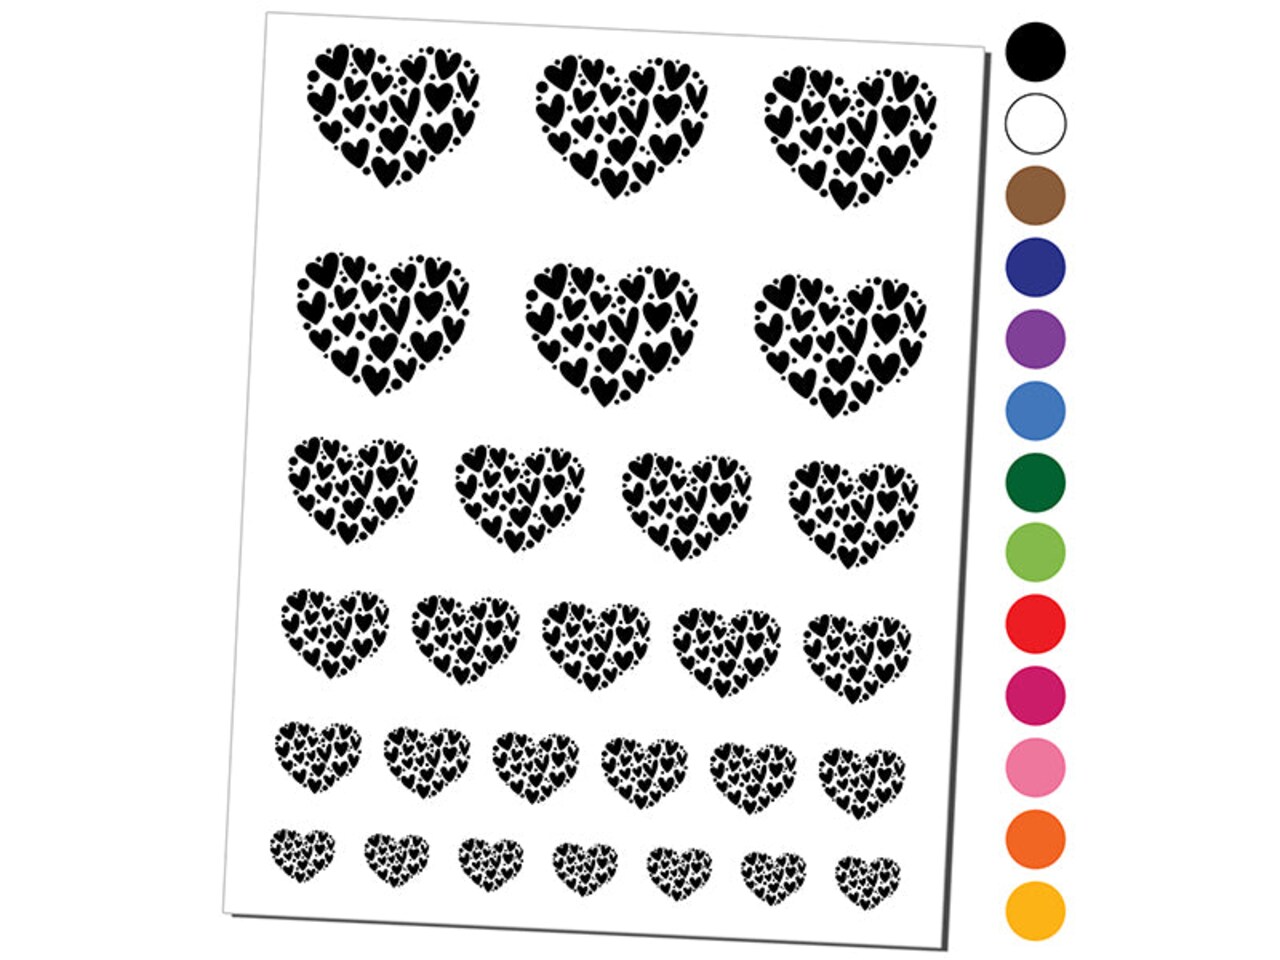 Adorable Heart Made of Hearts and Dots Temporary Tattoo Water Resistant Fake Body Art Set Collection